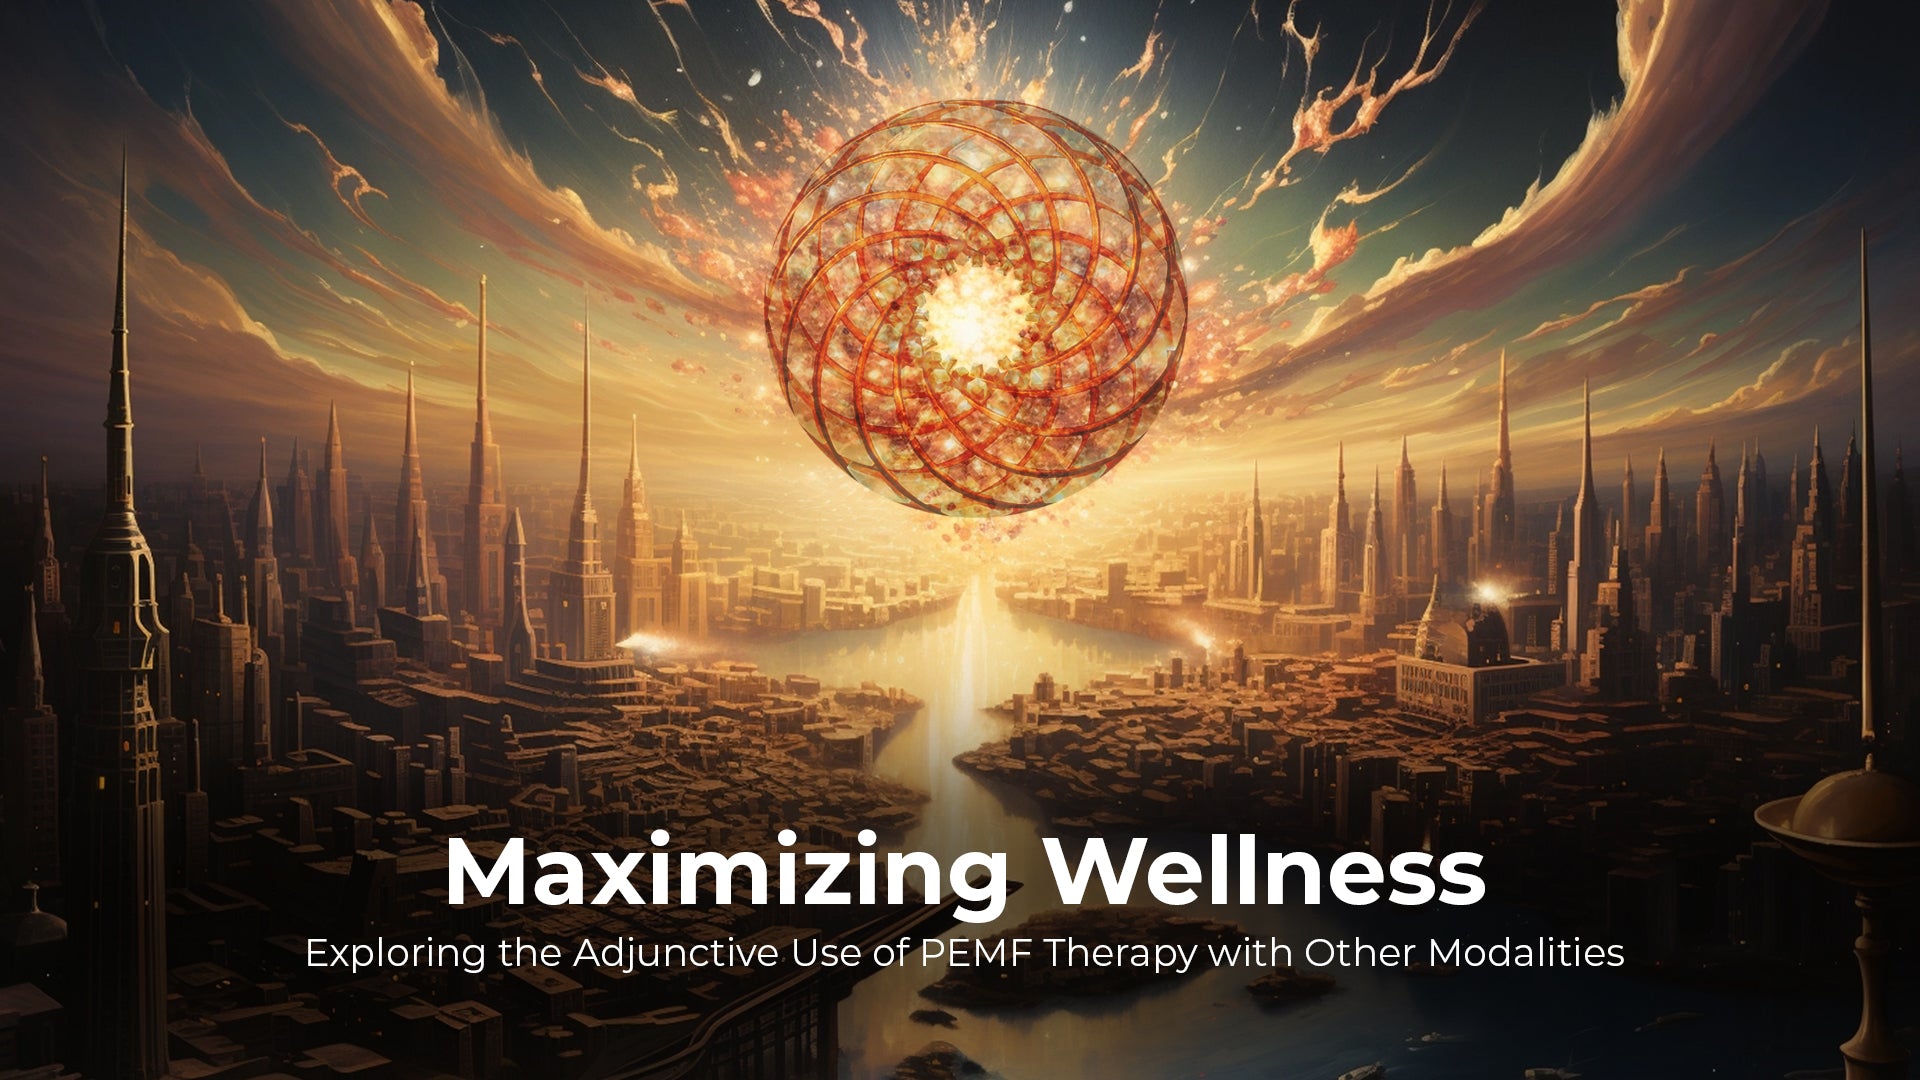 Maximizing Wellness: Exploring the Adjunctive Use of PEMF Therapy with Other Modalities